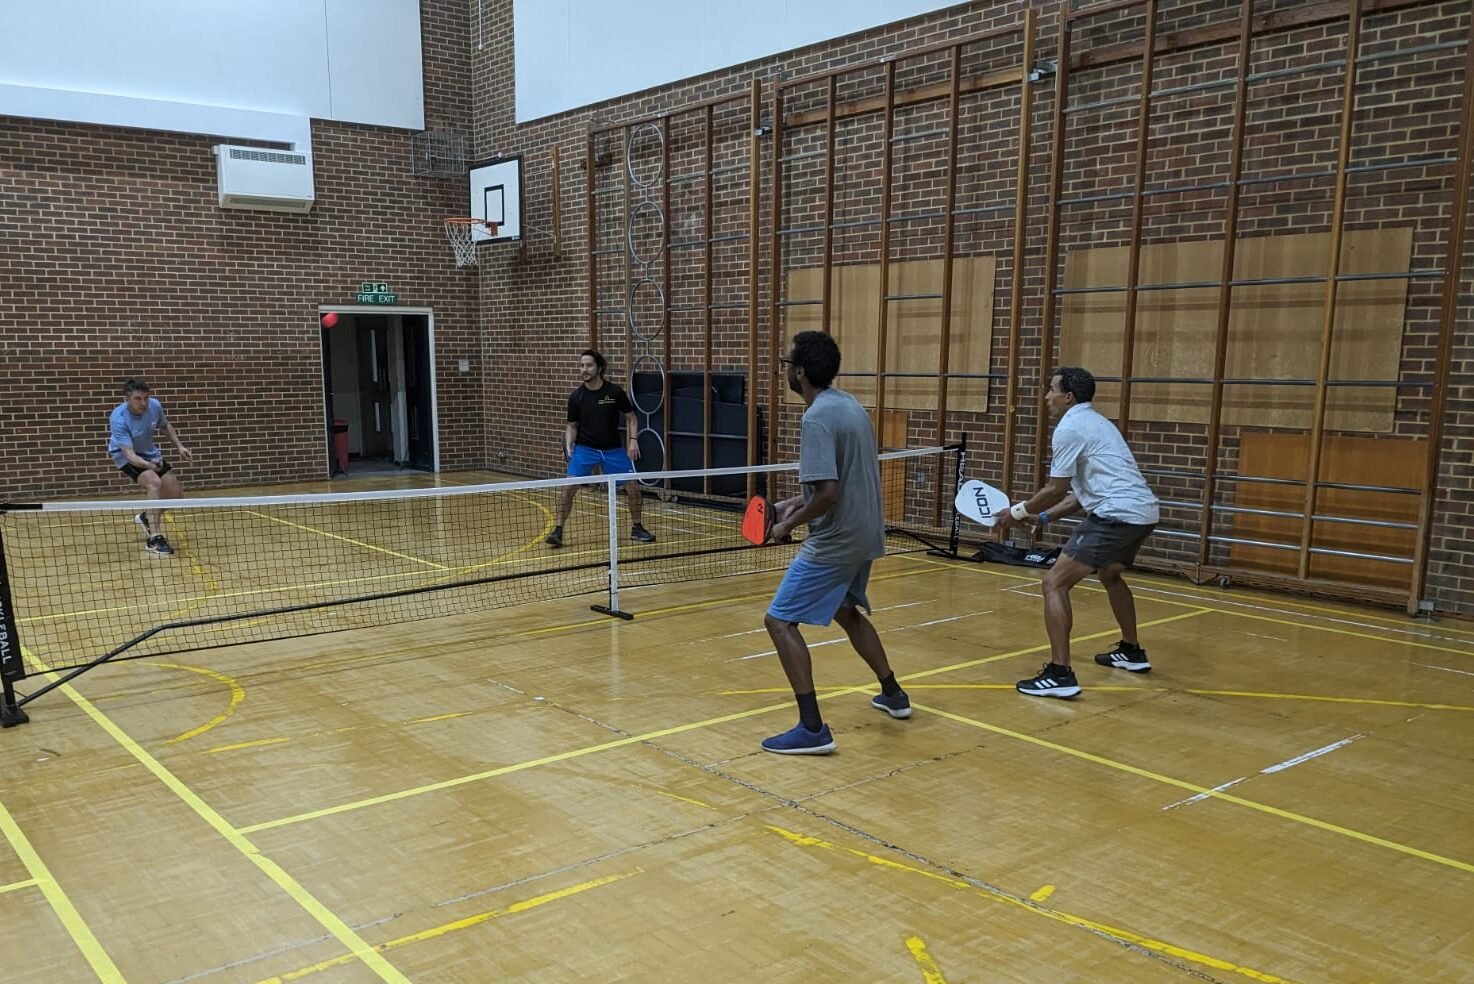 Lemon Pickleball's first session, with players enjoying a competitive match